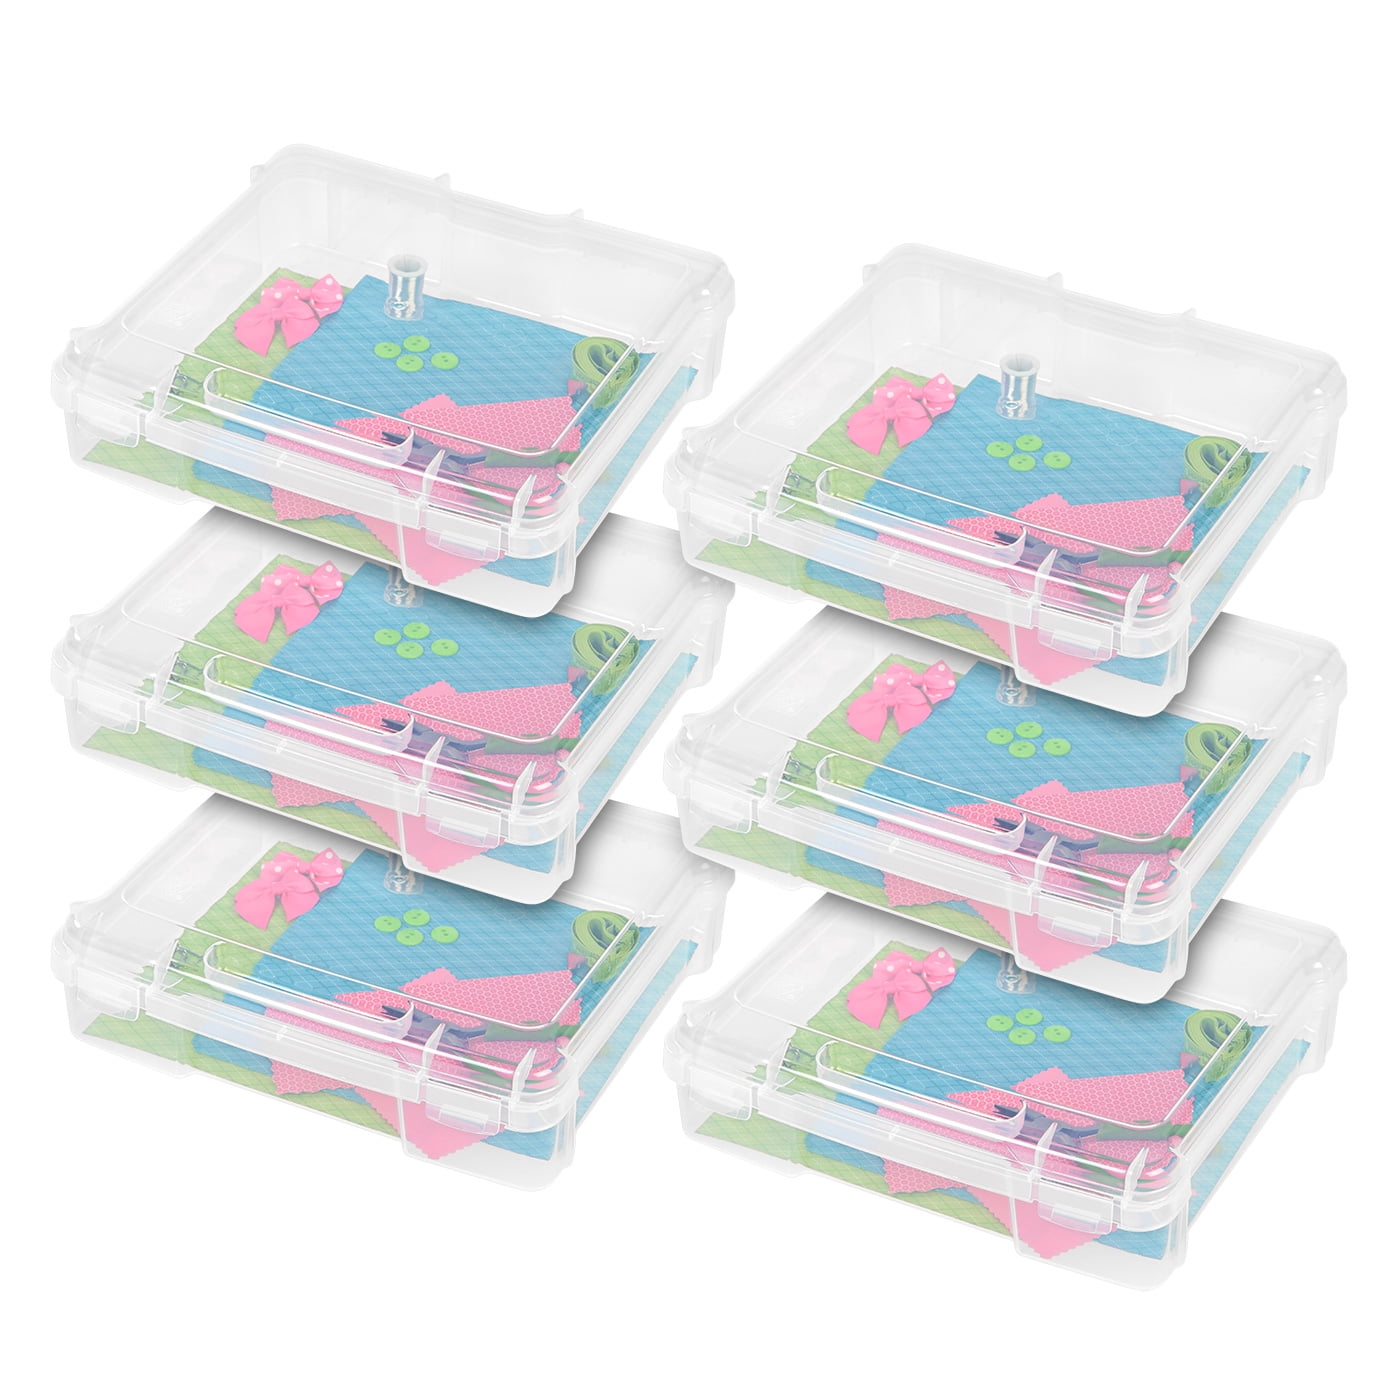 Iris 6 x 6 Portable Project Case, 8 Pack, Clear